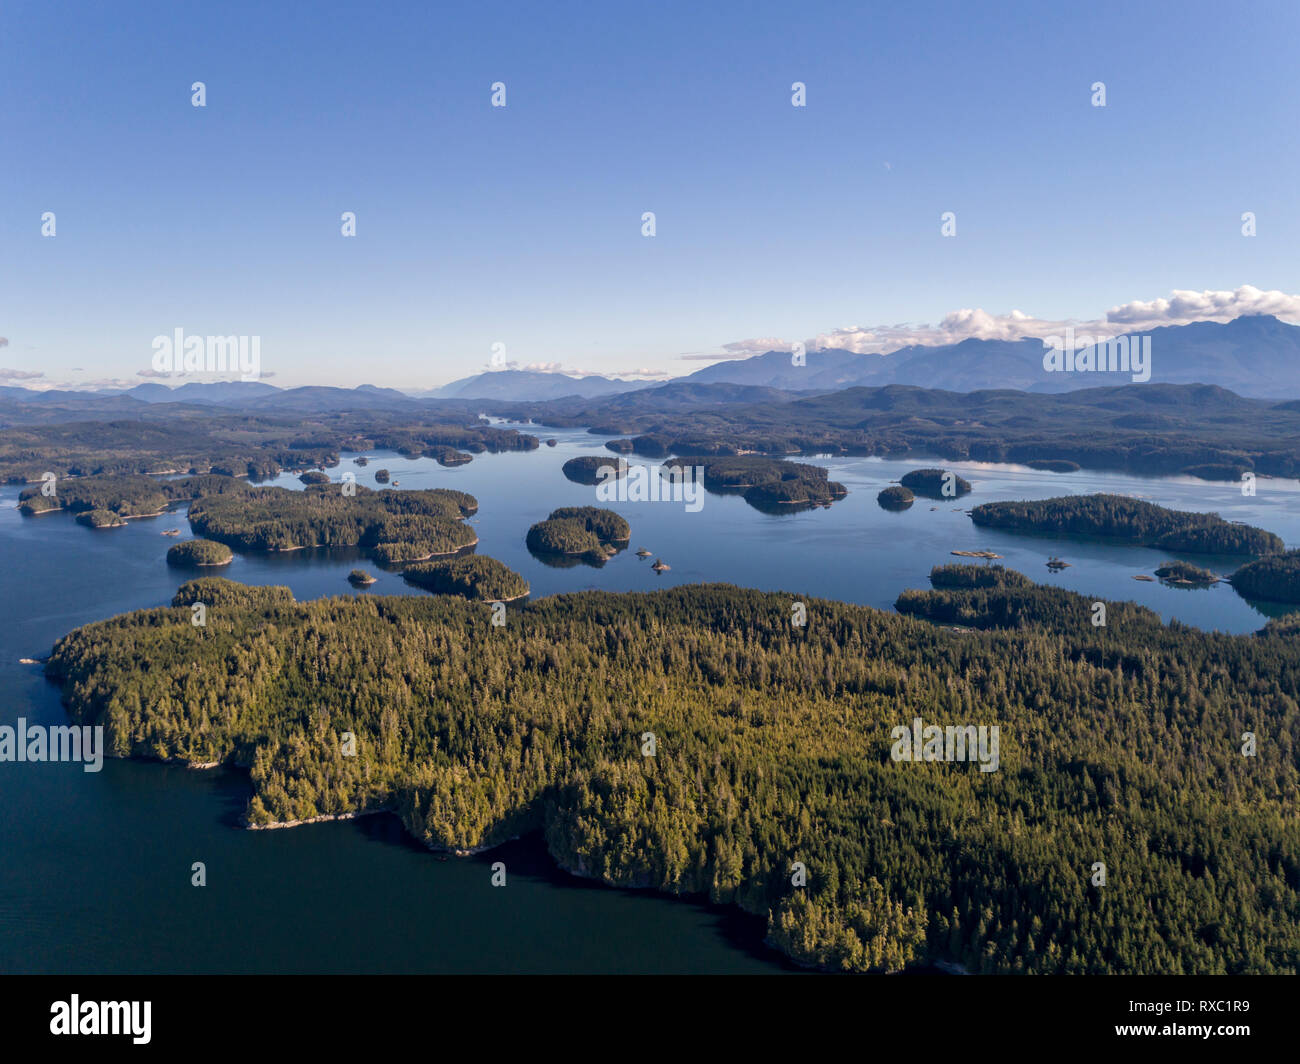 Aerial photograph of the Broughton Archipelago Marine Park, First Nations Territory, British Columbia, Canada. Stock Photo